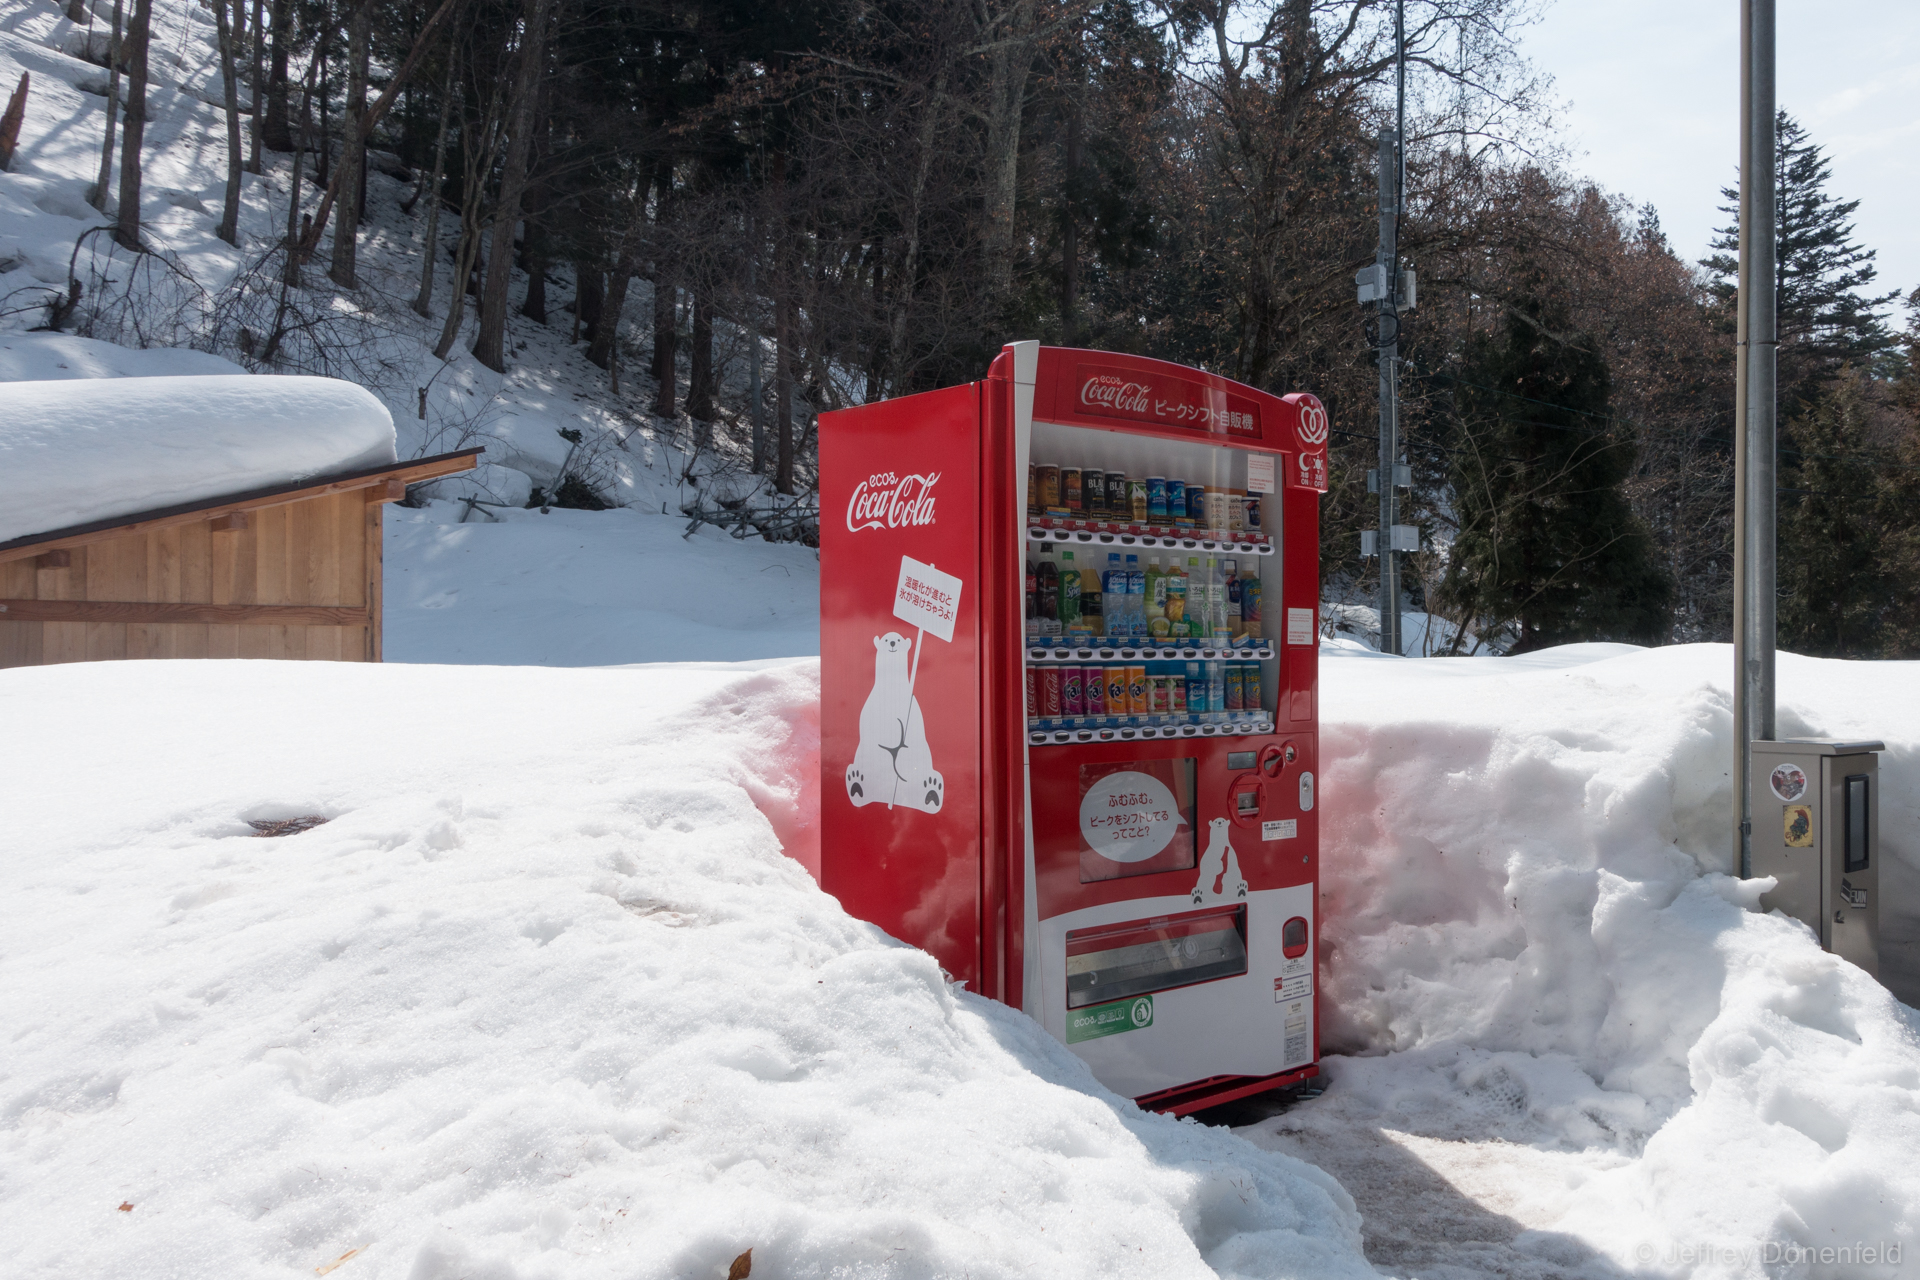 Japan loves vending machines - so much so that a snowy field seems like a great place to maintain one. Hot or cold drinks anytime!